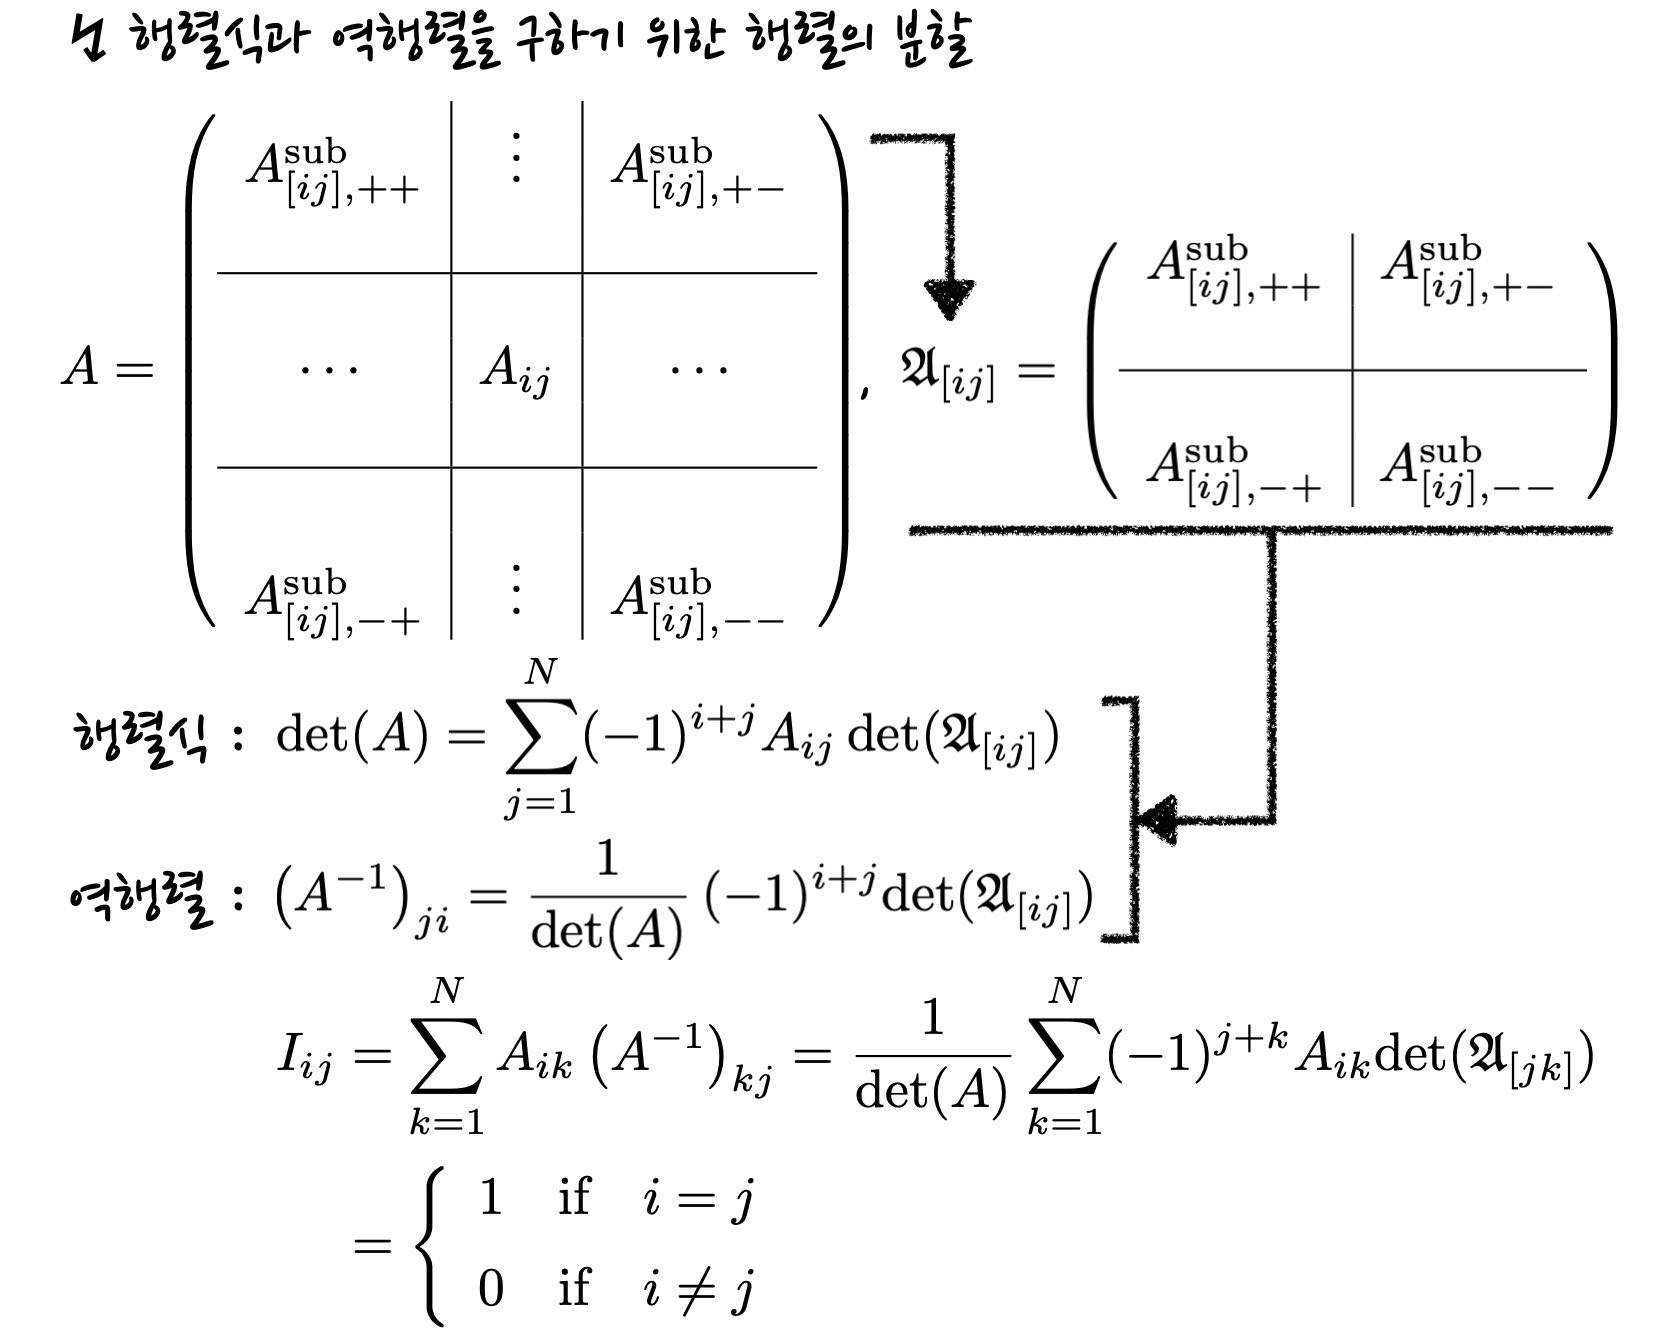 schematics of determinant and inverse matrix&#44; showing the recurrence relation in terms of determinants of sub-matrices